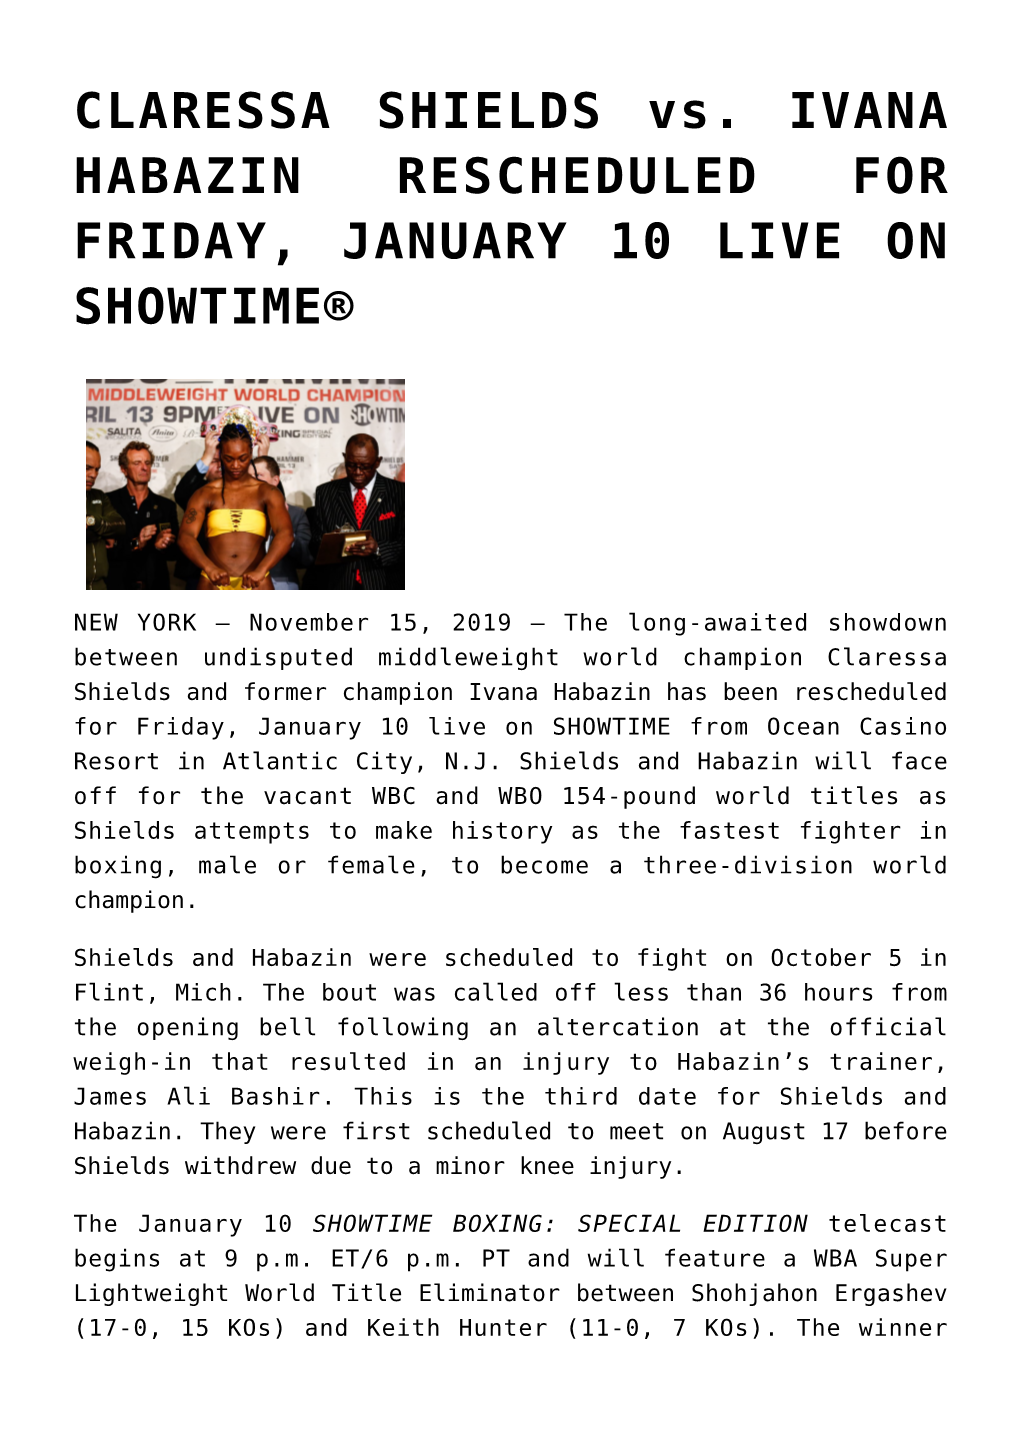 CLARESSA SHIELDS Vs. IVANA HABAZIN RESCHEDULED for FRIDAY, JANUARY 10 LIVE on SHOWTIME®